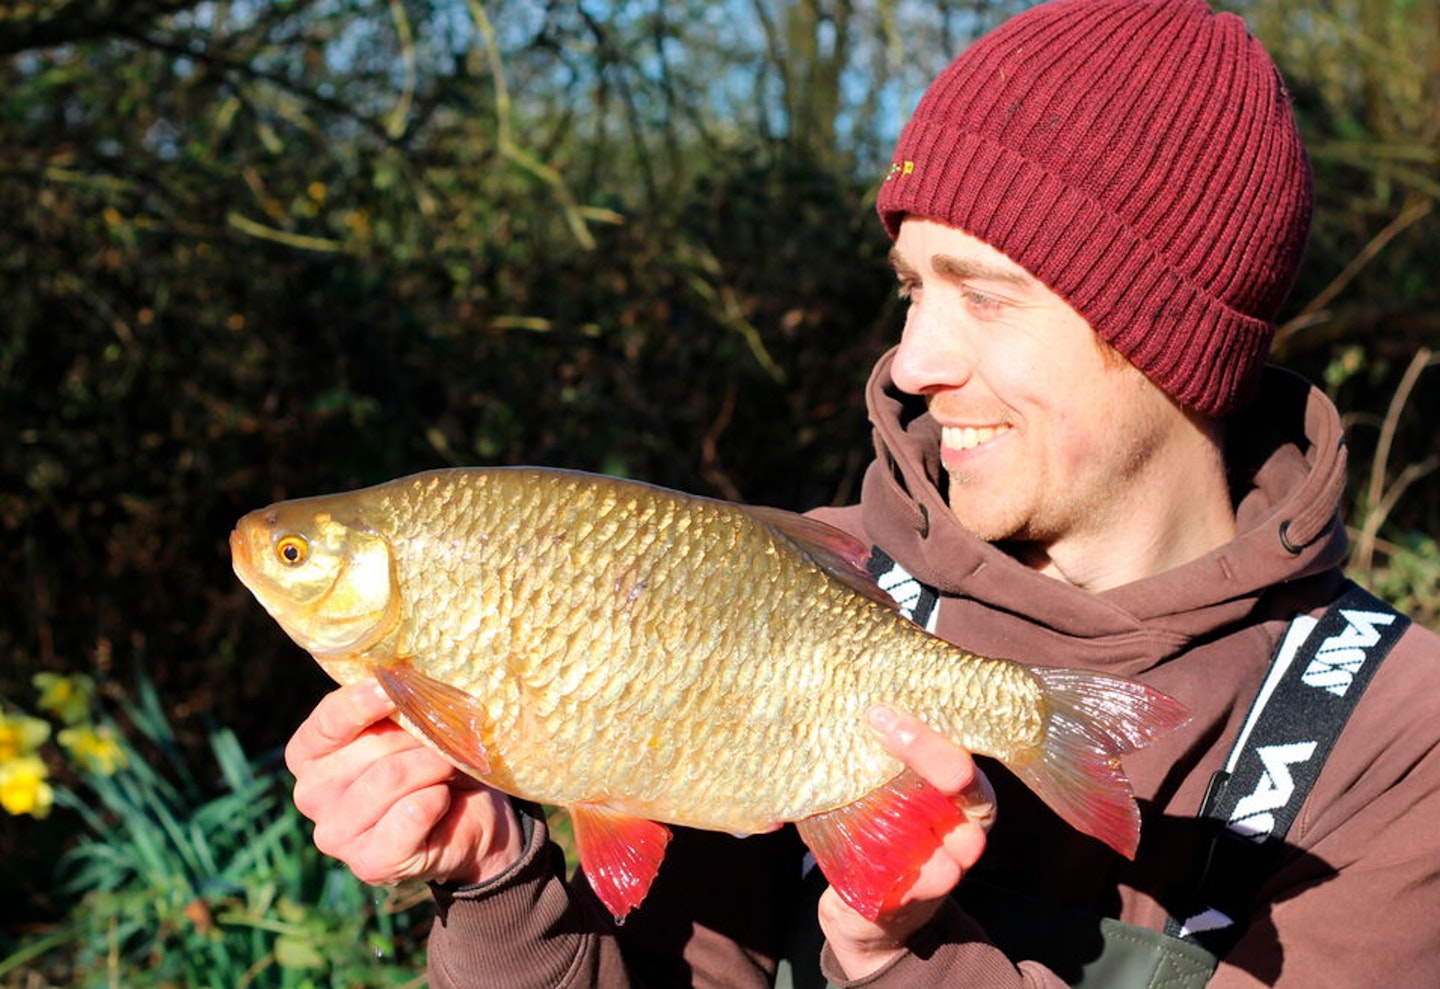 The 3lb 9oz rudd fell to three popped-up red maggots